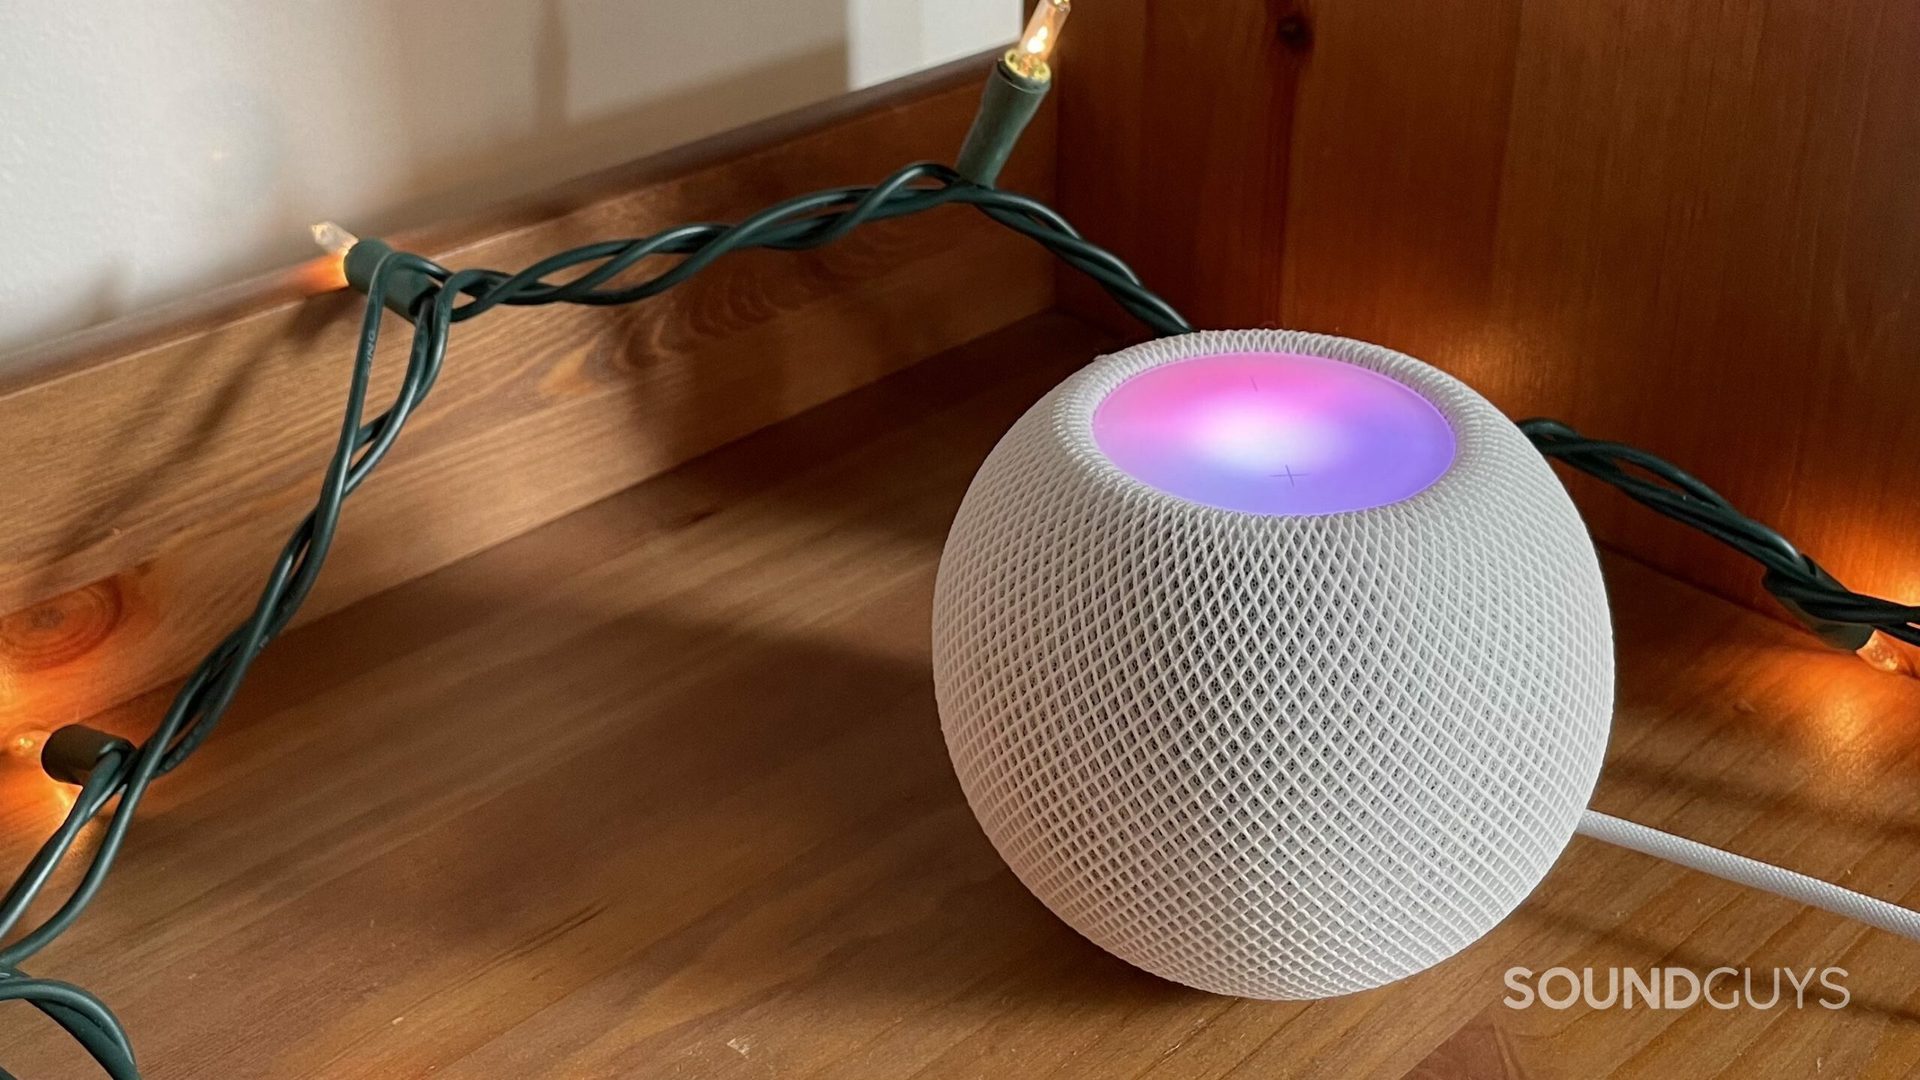 The HomePod mini on a wooden floor next to some lights.